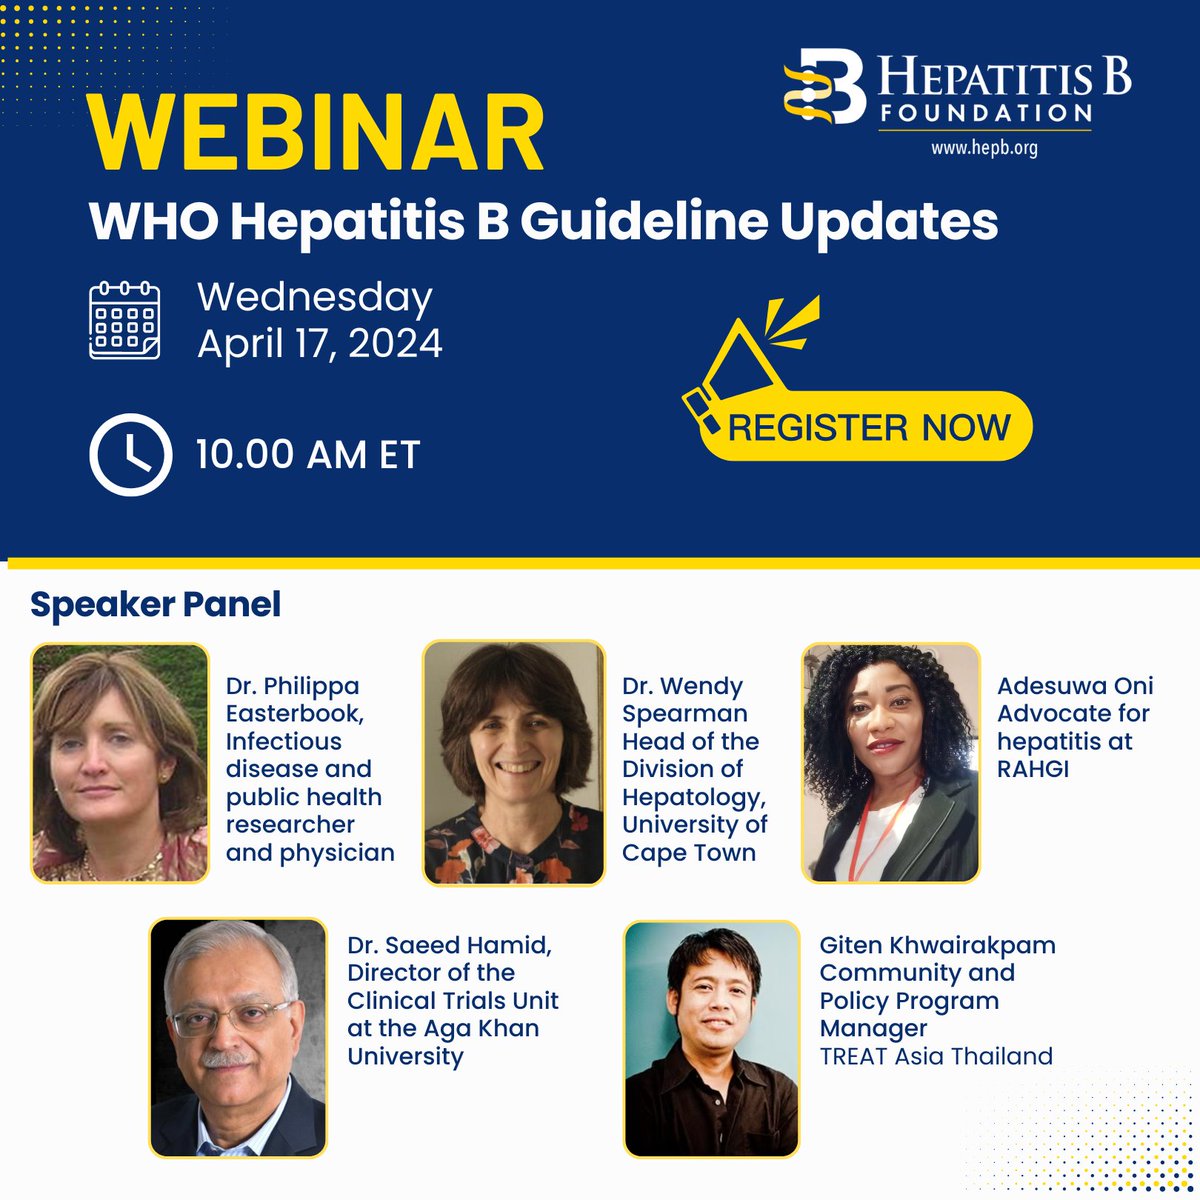 You are invited to a WEBINAR 💻 📅 Apr 17, 2024 ⏲️10 a.m. ET 🗣️Topic: Global Updates: Hepatitis B World Health Organization Guidelines Register 👉 ow.ly/Pa8r50R4f5O  ✔️After registering, you will receive a confirmation email with details.